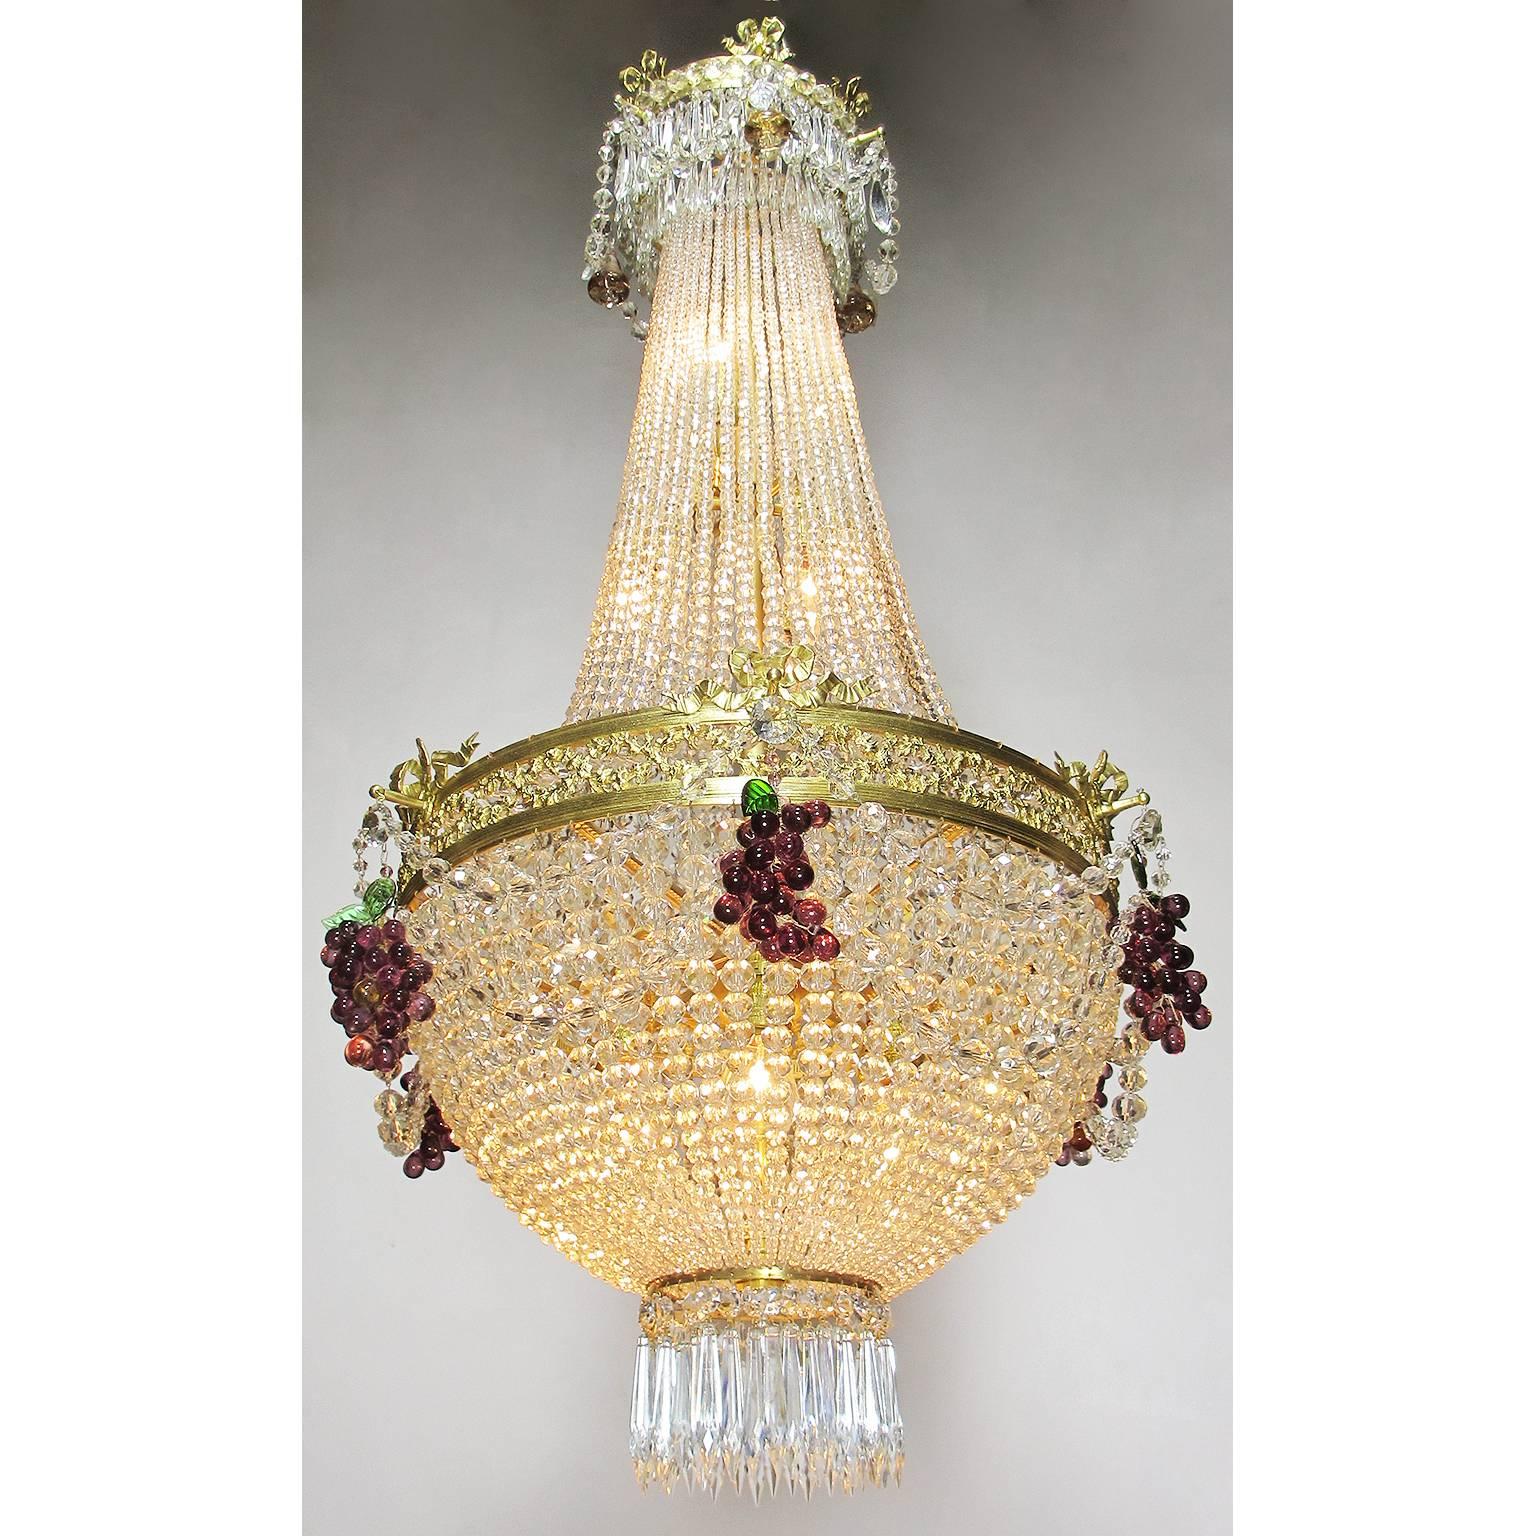 A fine French 19th-20th century Louis XVI style beaded glass and gilt-metal basket thirteen-light chandelier, the pierced gilt-metal center rim with wreaths and tied-bows, surmounted with Amethyst grape clusters and color glass leafs, the top canopy